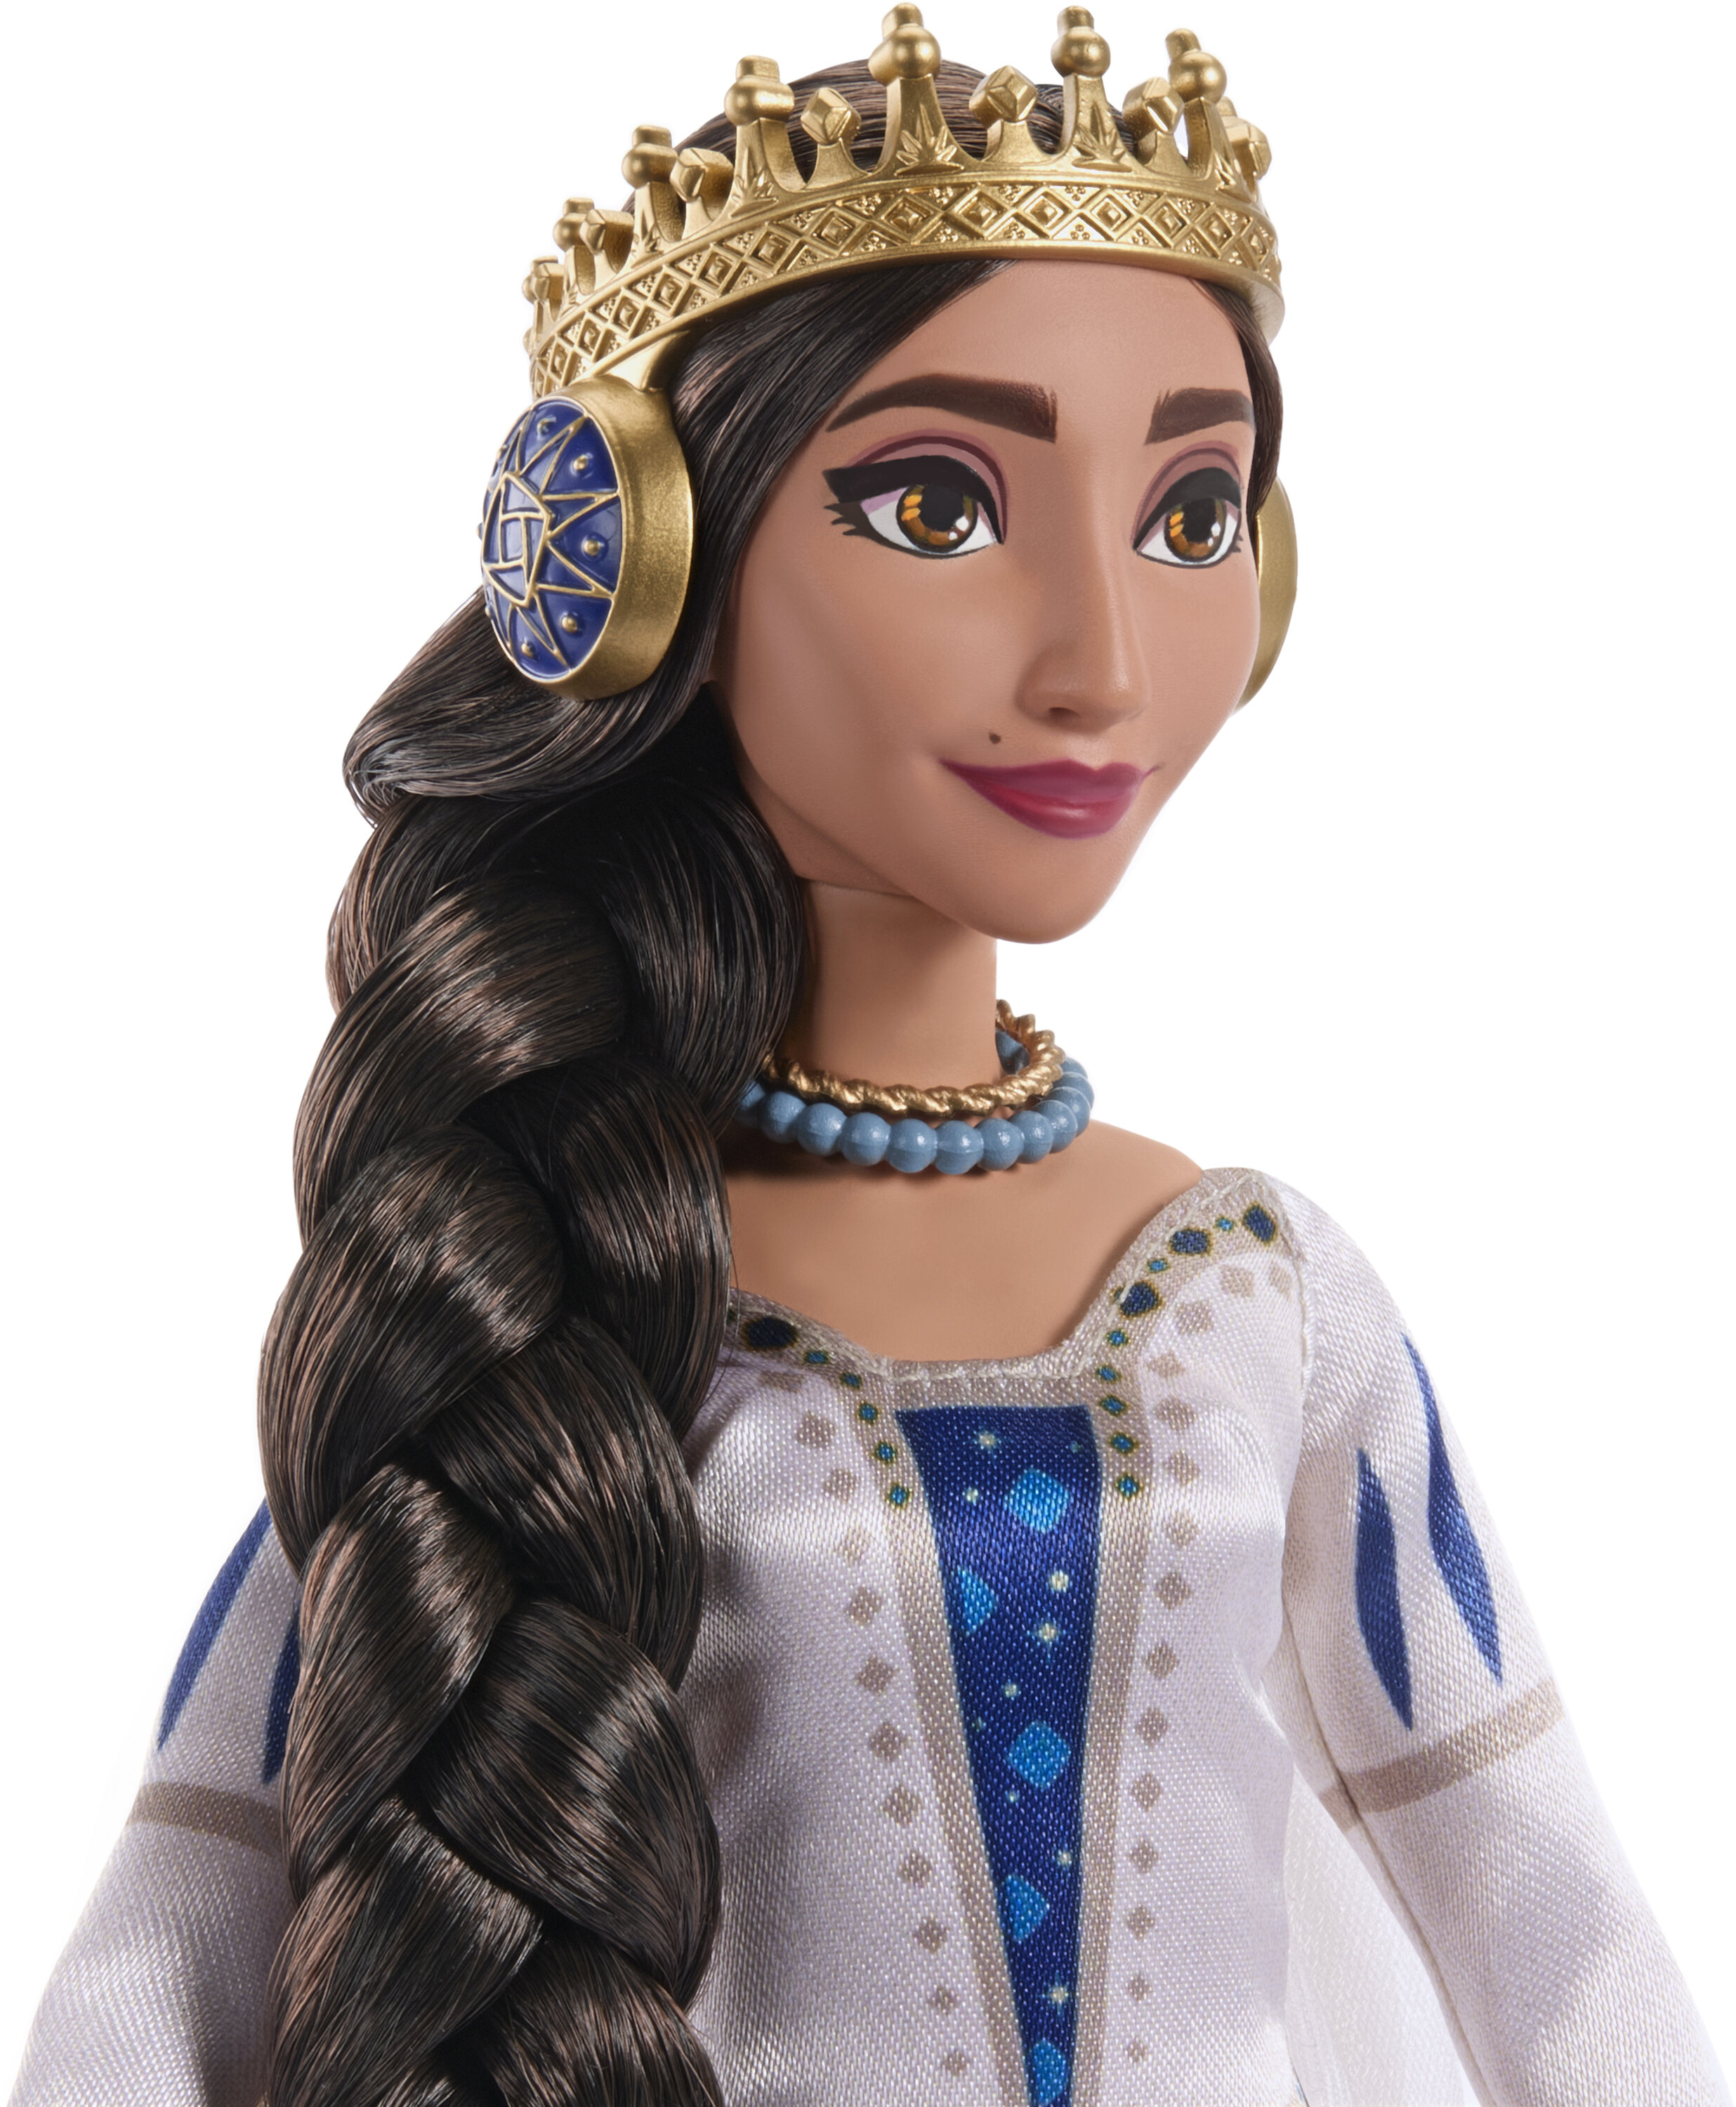 Disney Wish Queen Amaya of Rosas 11 inch Fashion Doll, Posable Doll & Accessories - image 5 of 7